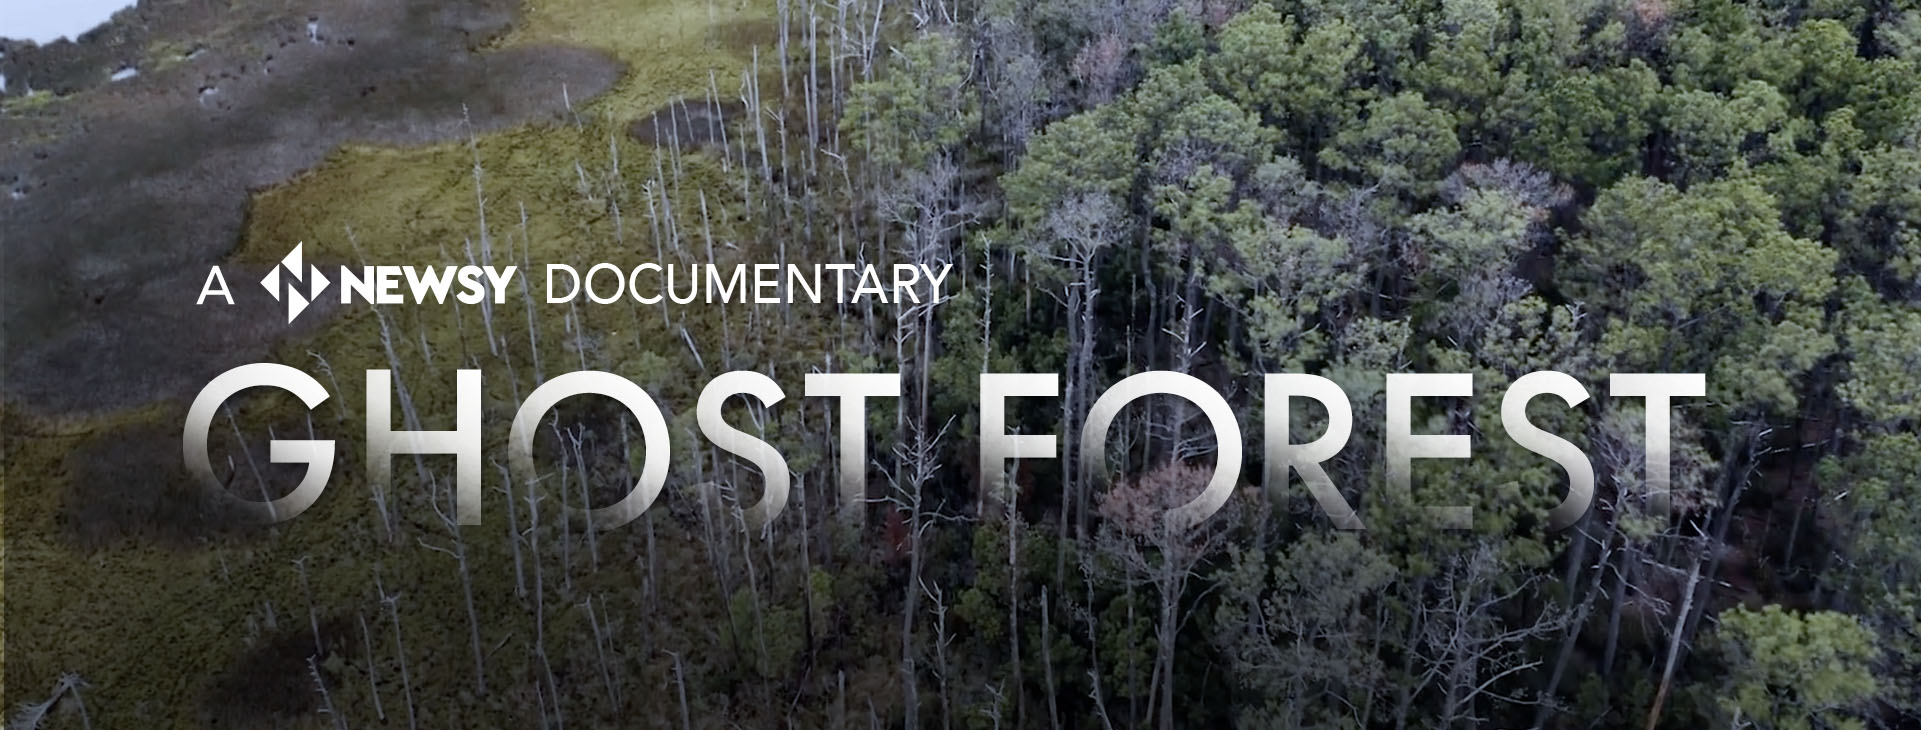 Ghost Forest Newsy documentary logo